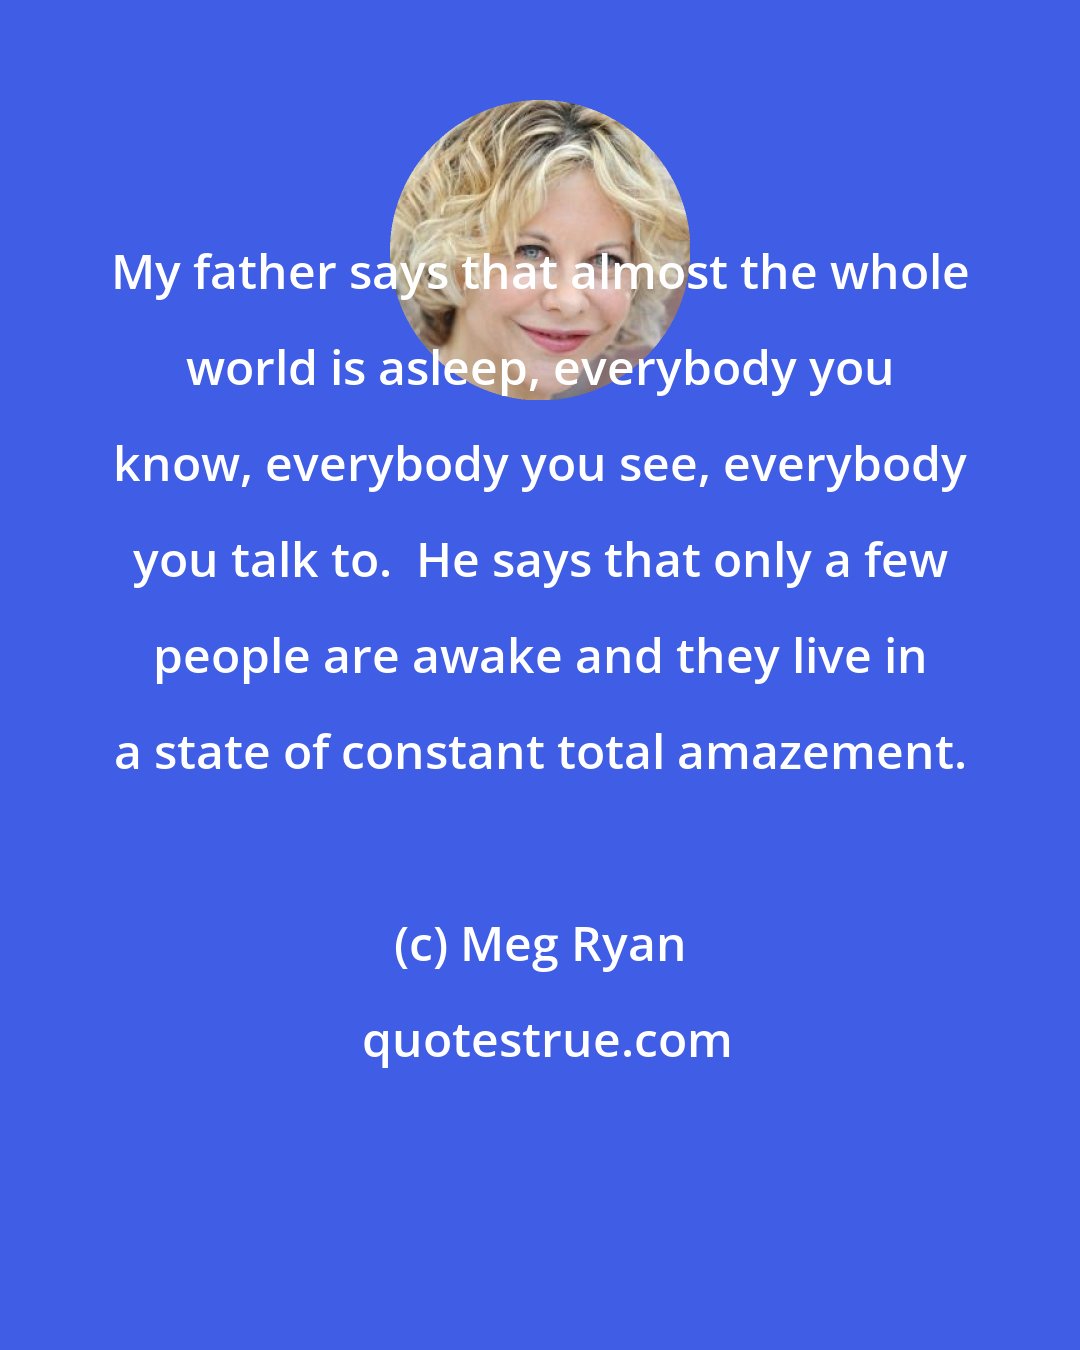 Meg Ryan: My father says that almost the whole world is asleep, everybody you know, everybody you see, everybody you talk to.  He says that only a few people are awake and they live in a state of constant total amazement.